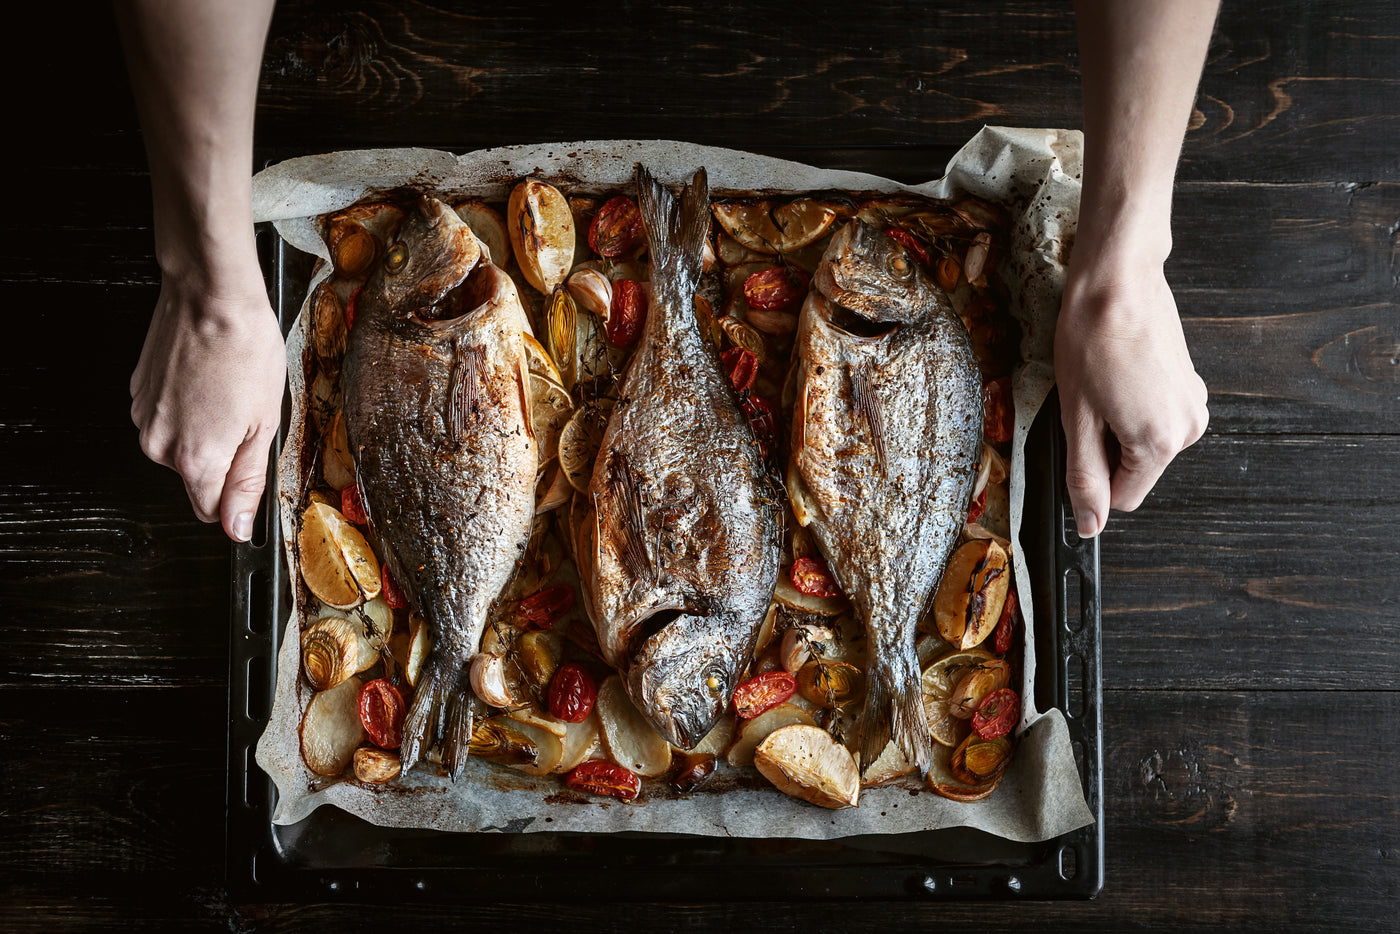 RED WINE AND FISH CAN GO SWIMMINGLY TOGETHER